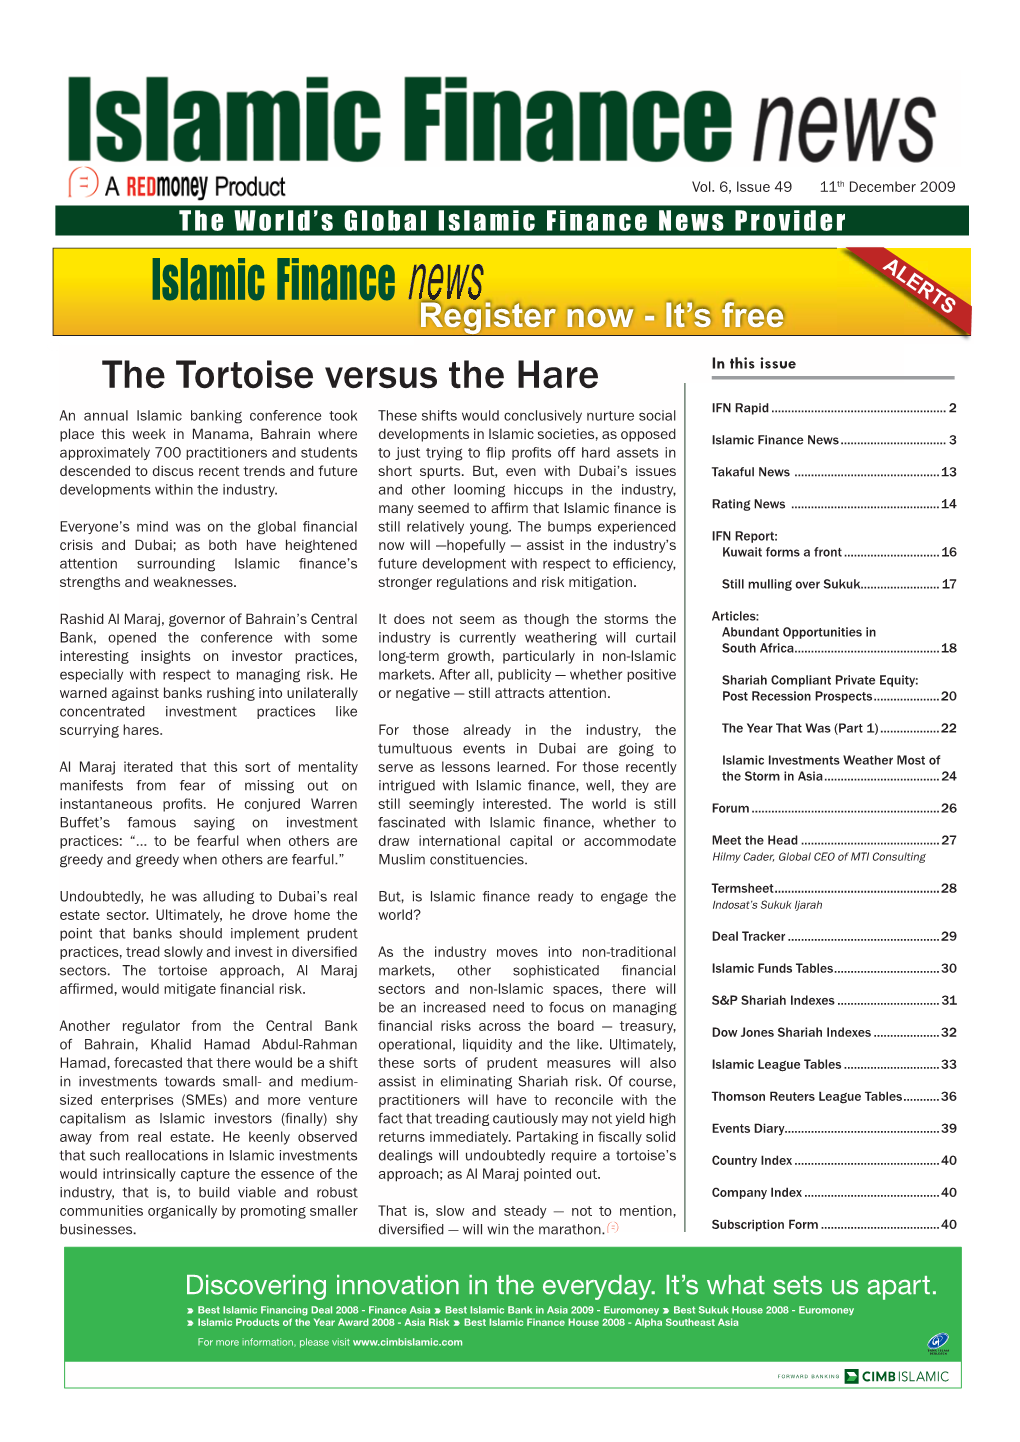 The Tortoise Versus the Hare in This Issue an Annual Islamic Banking Conference Took These Shifts Would Conclusively Nurture Social IFN Rapid